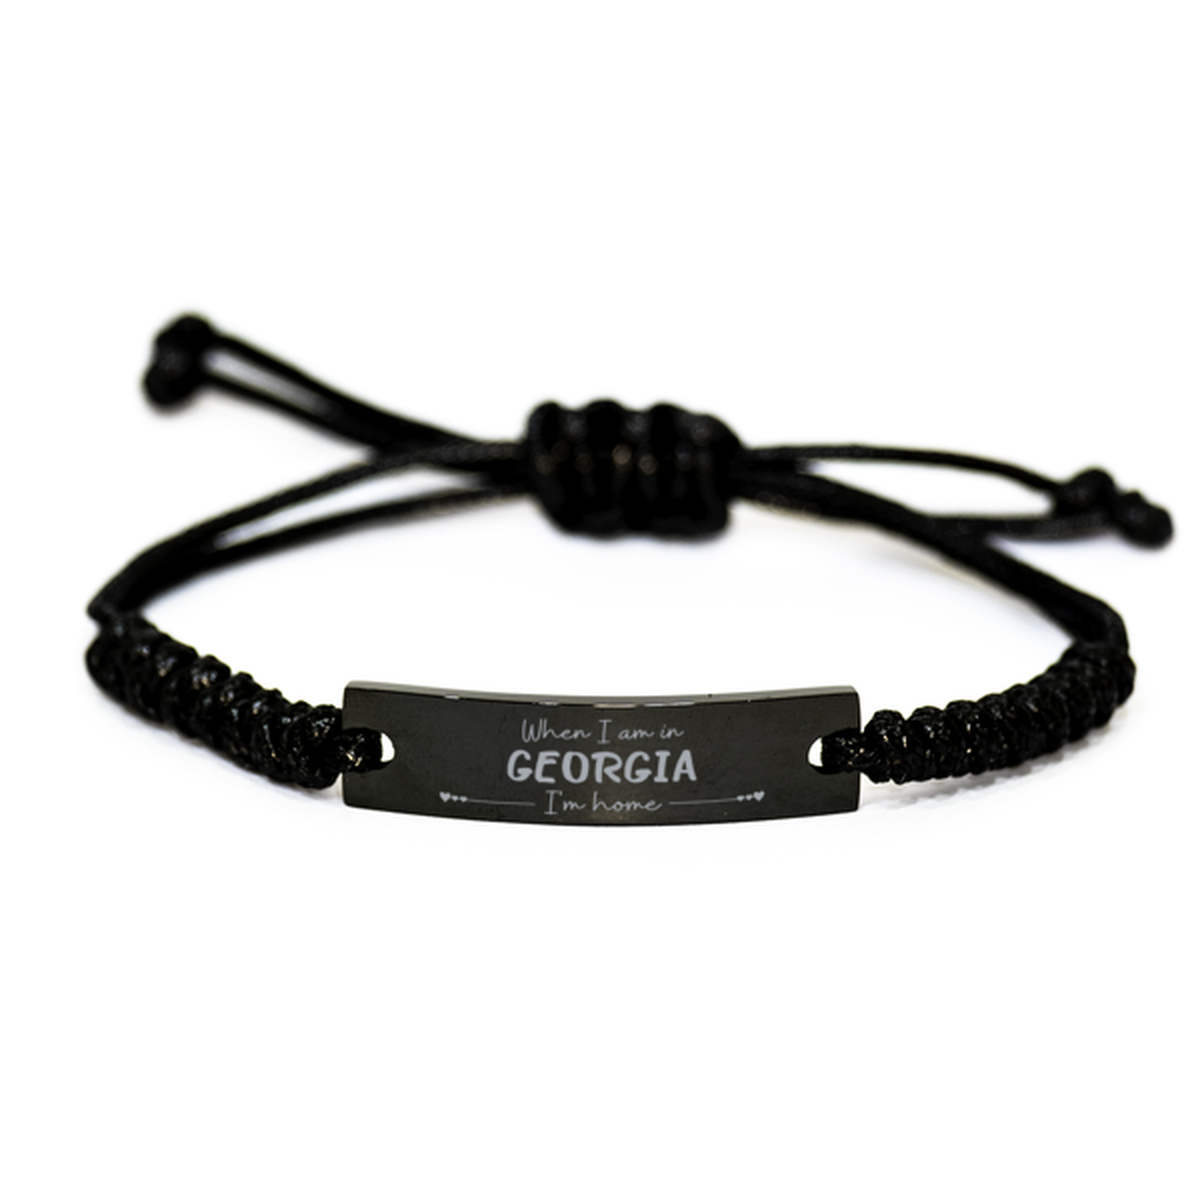 When I am in Georgia I'm home Black Rope Bracelet, Cheap Gifts For Georgia, State Georgia Birthday Gifts for Friends Coworker